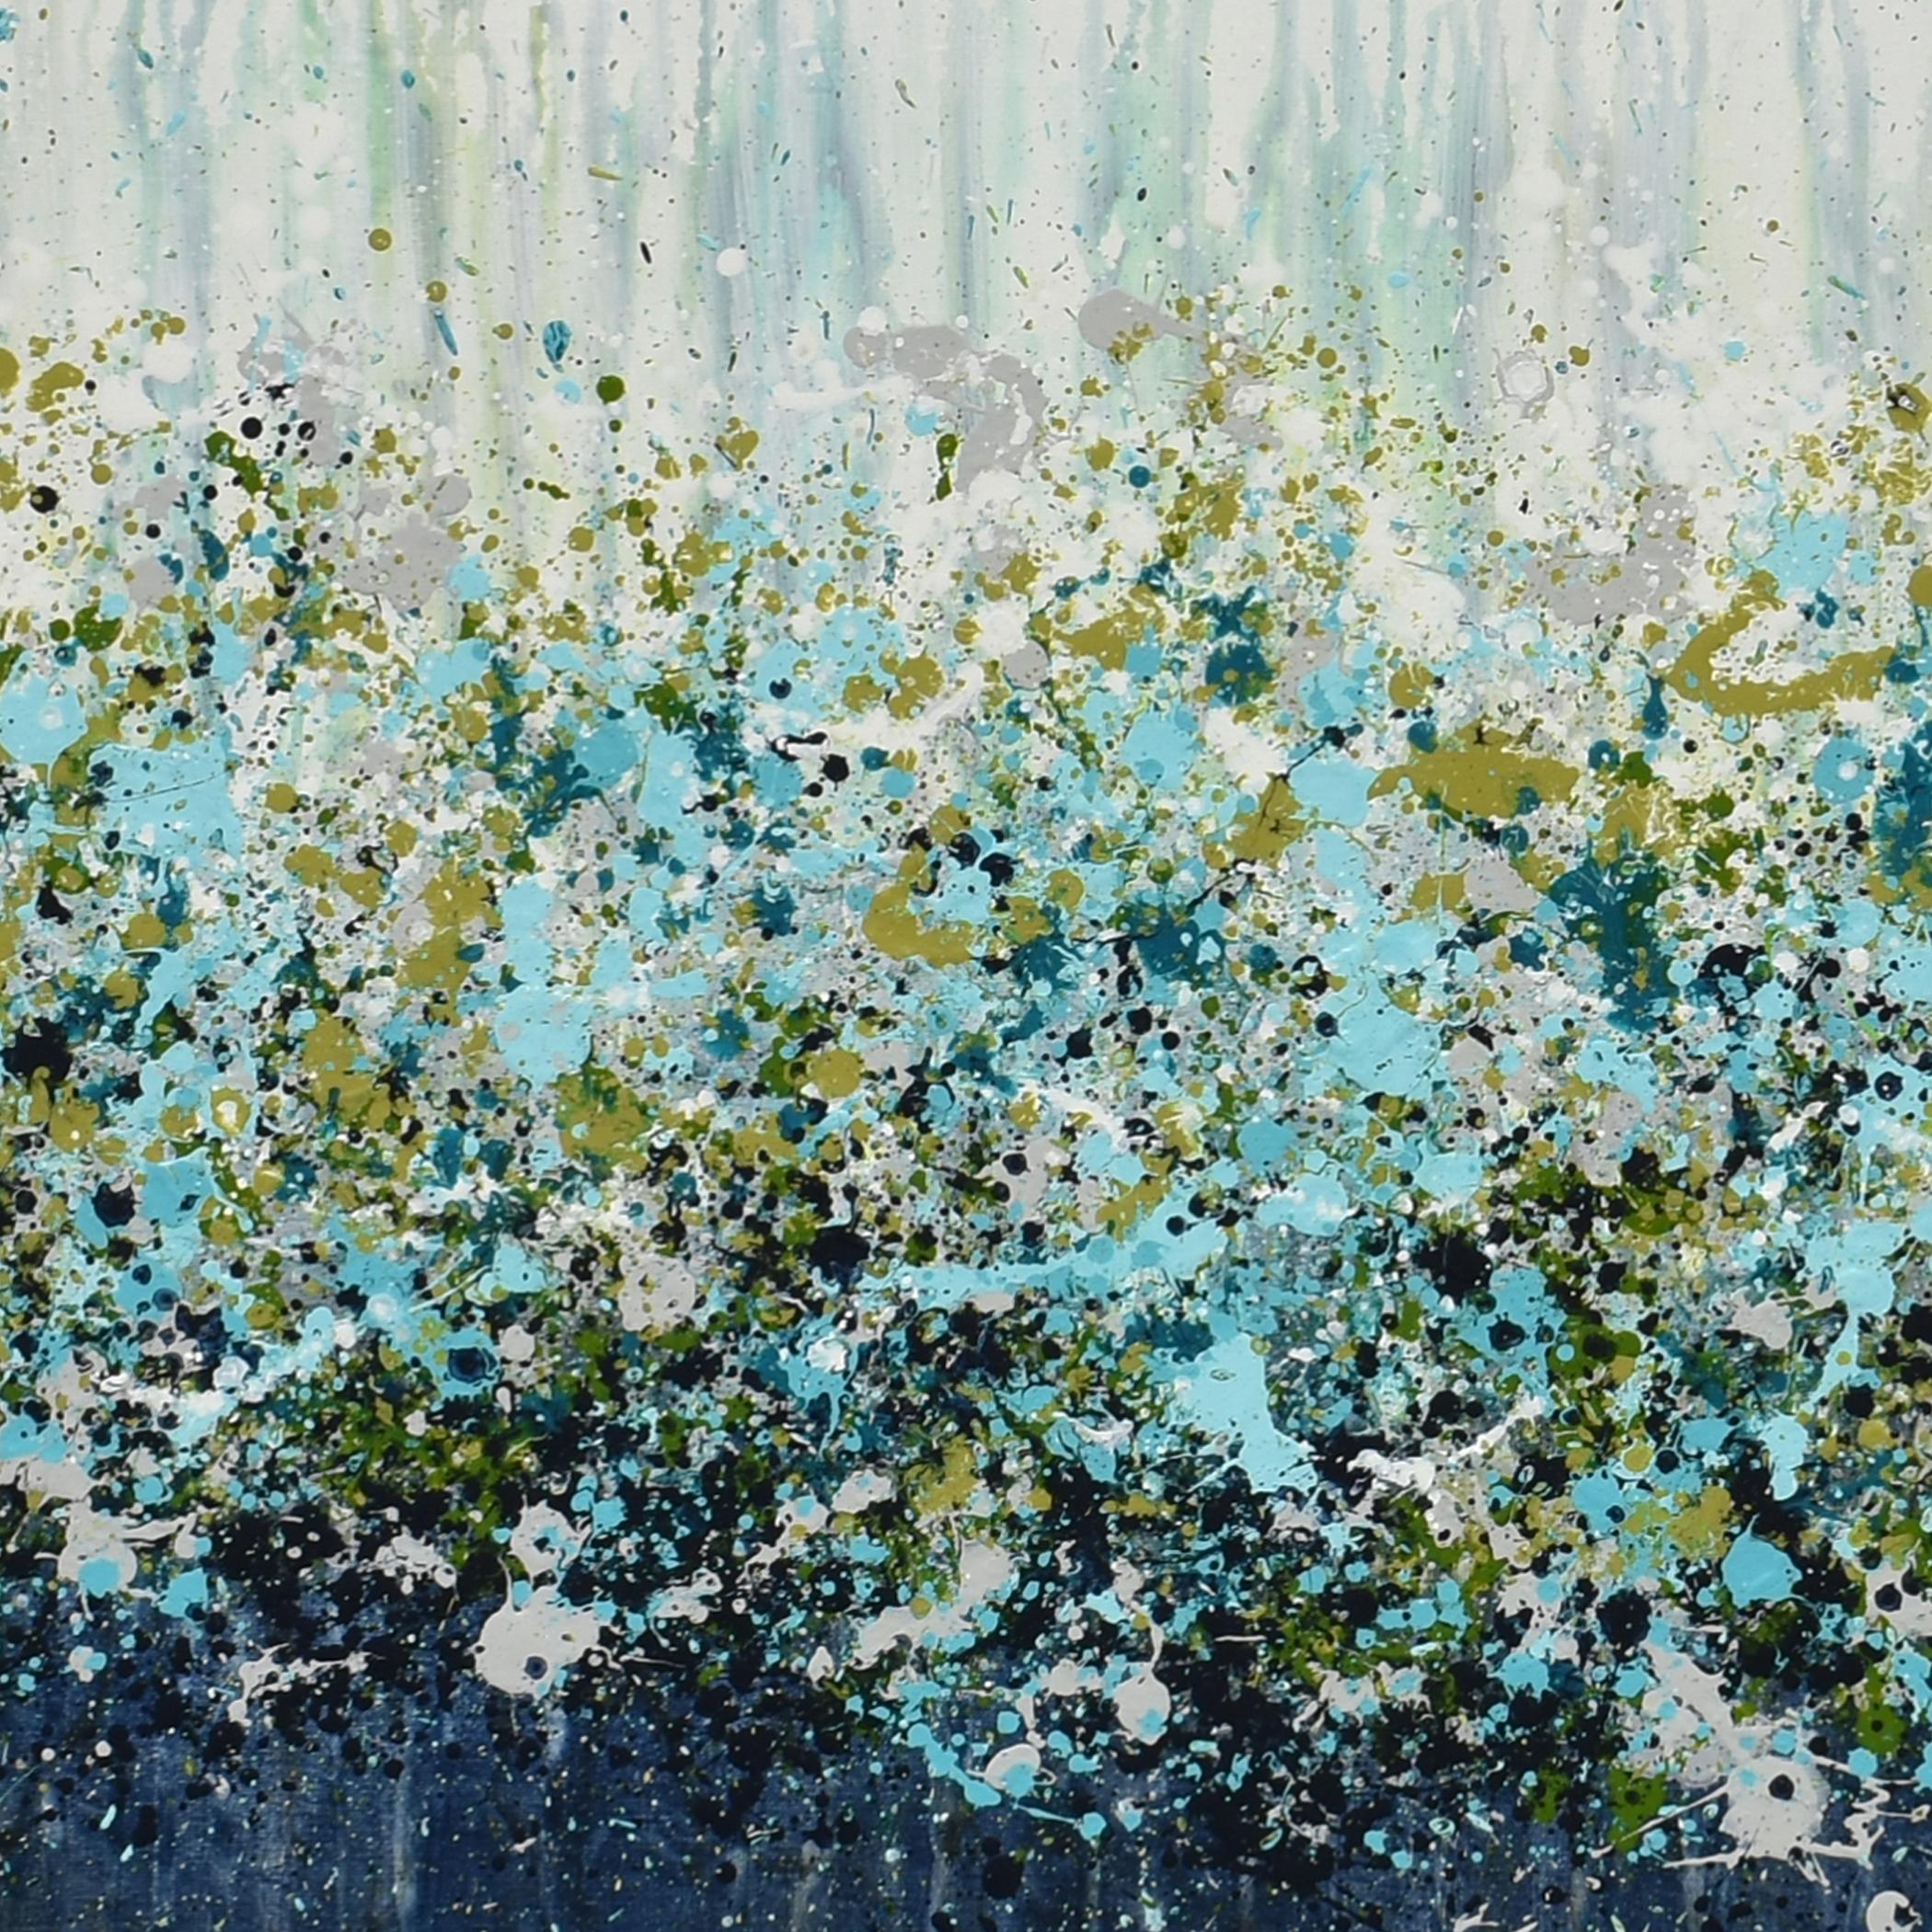 <p>Artist Comments<br />Artist Lisa Carney expresses a lush open field blanketed with blue and green flowers in this abstract composition. She uses a drip painting technique that consists of splashing the paint spontaneously onto the canvas. Lisa